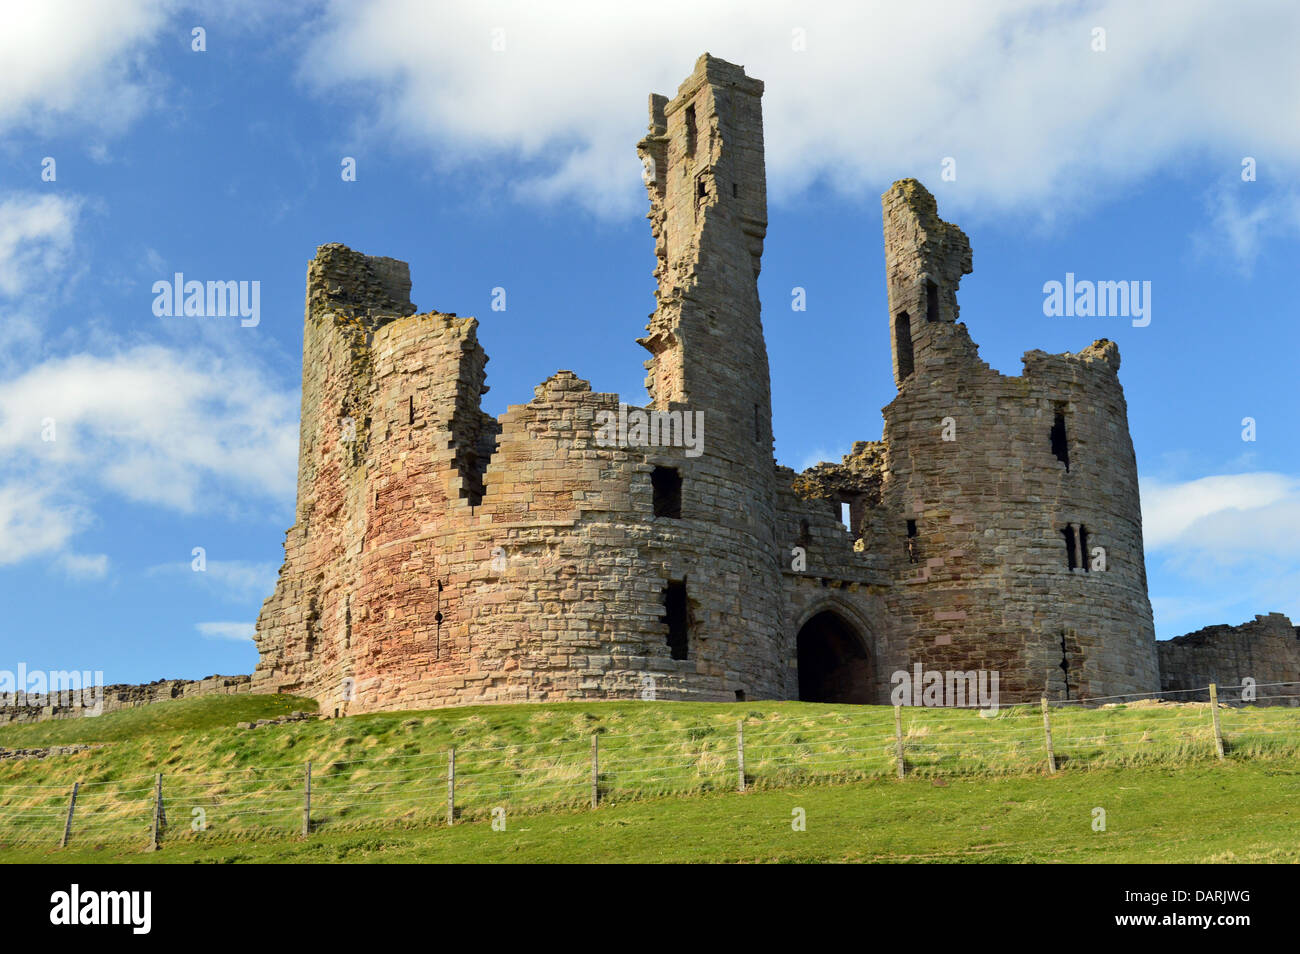 The Gatehouse to the Ruins of Dunstanburgh Castle on St Oswalds Way Long Distance Footpath Northumberland Coast Stock Photo